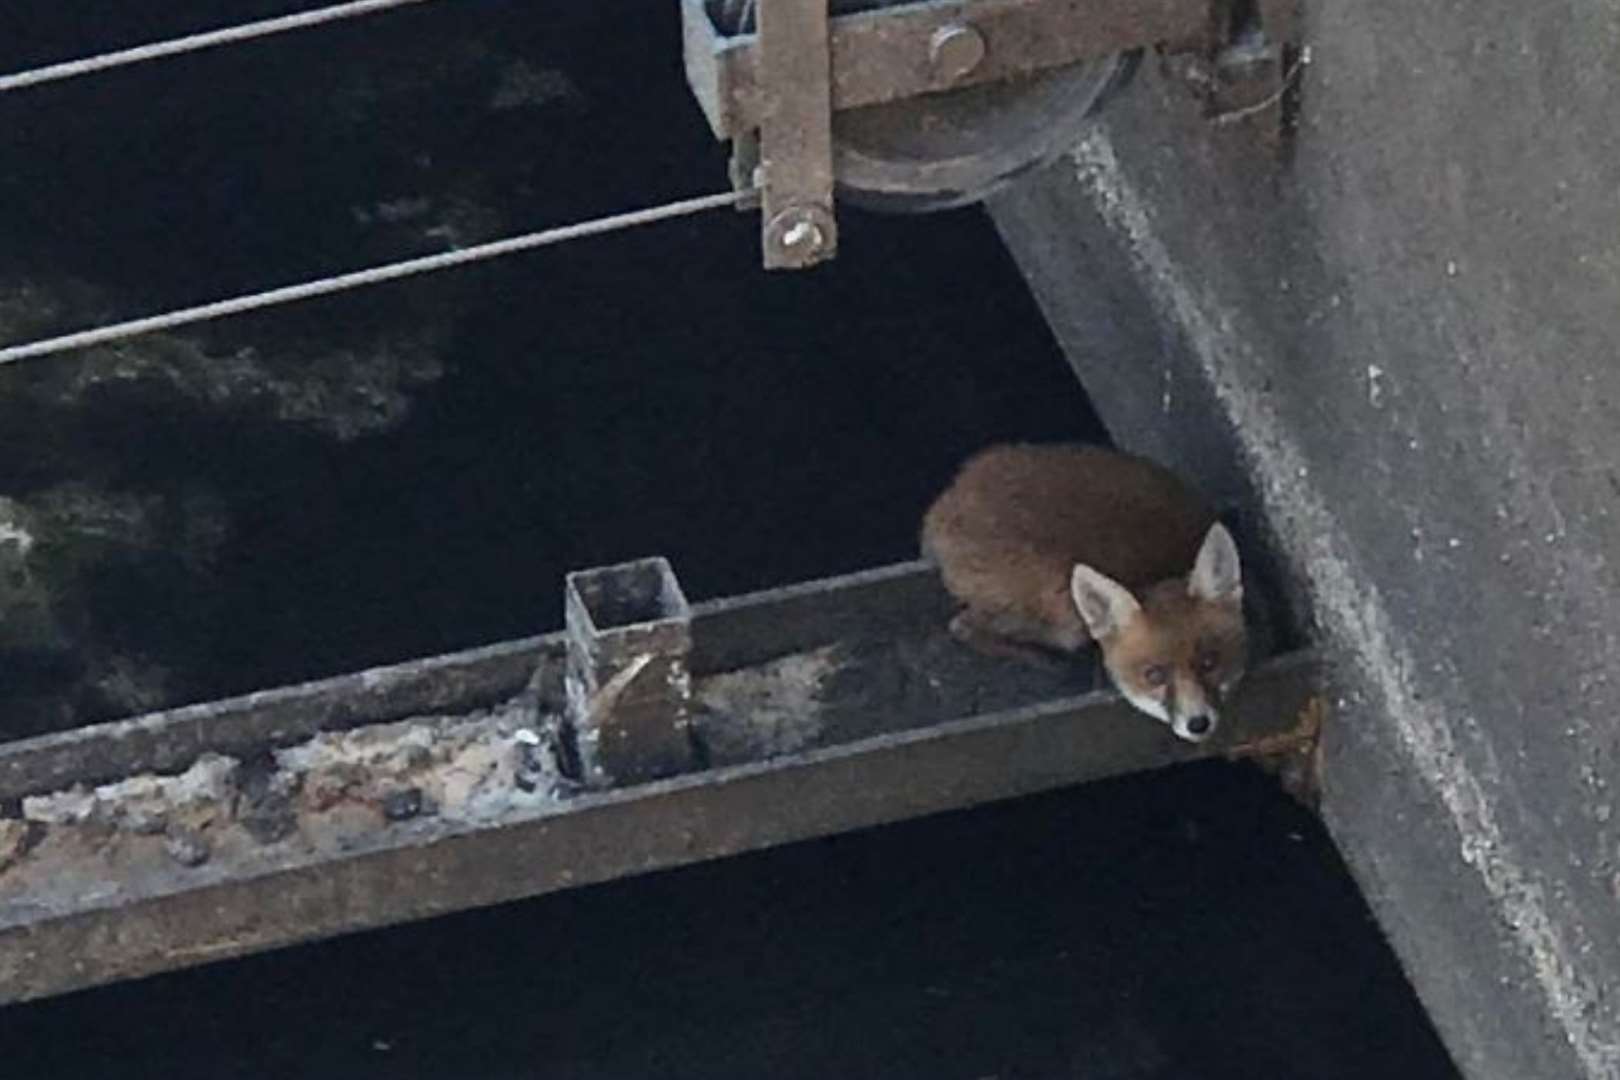 How'd he get down there? The lost fox on had fallen 30ft down a water tank